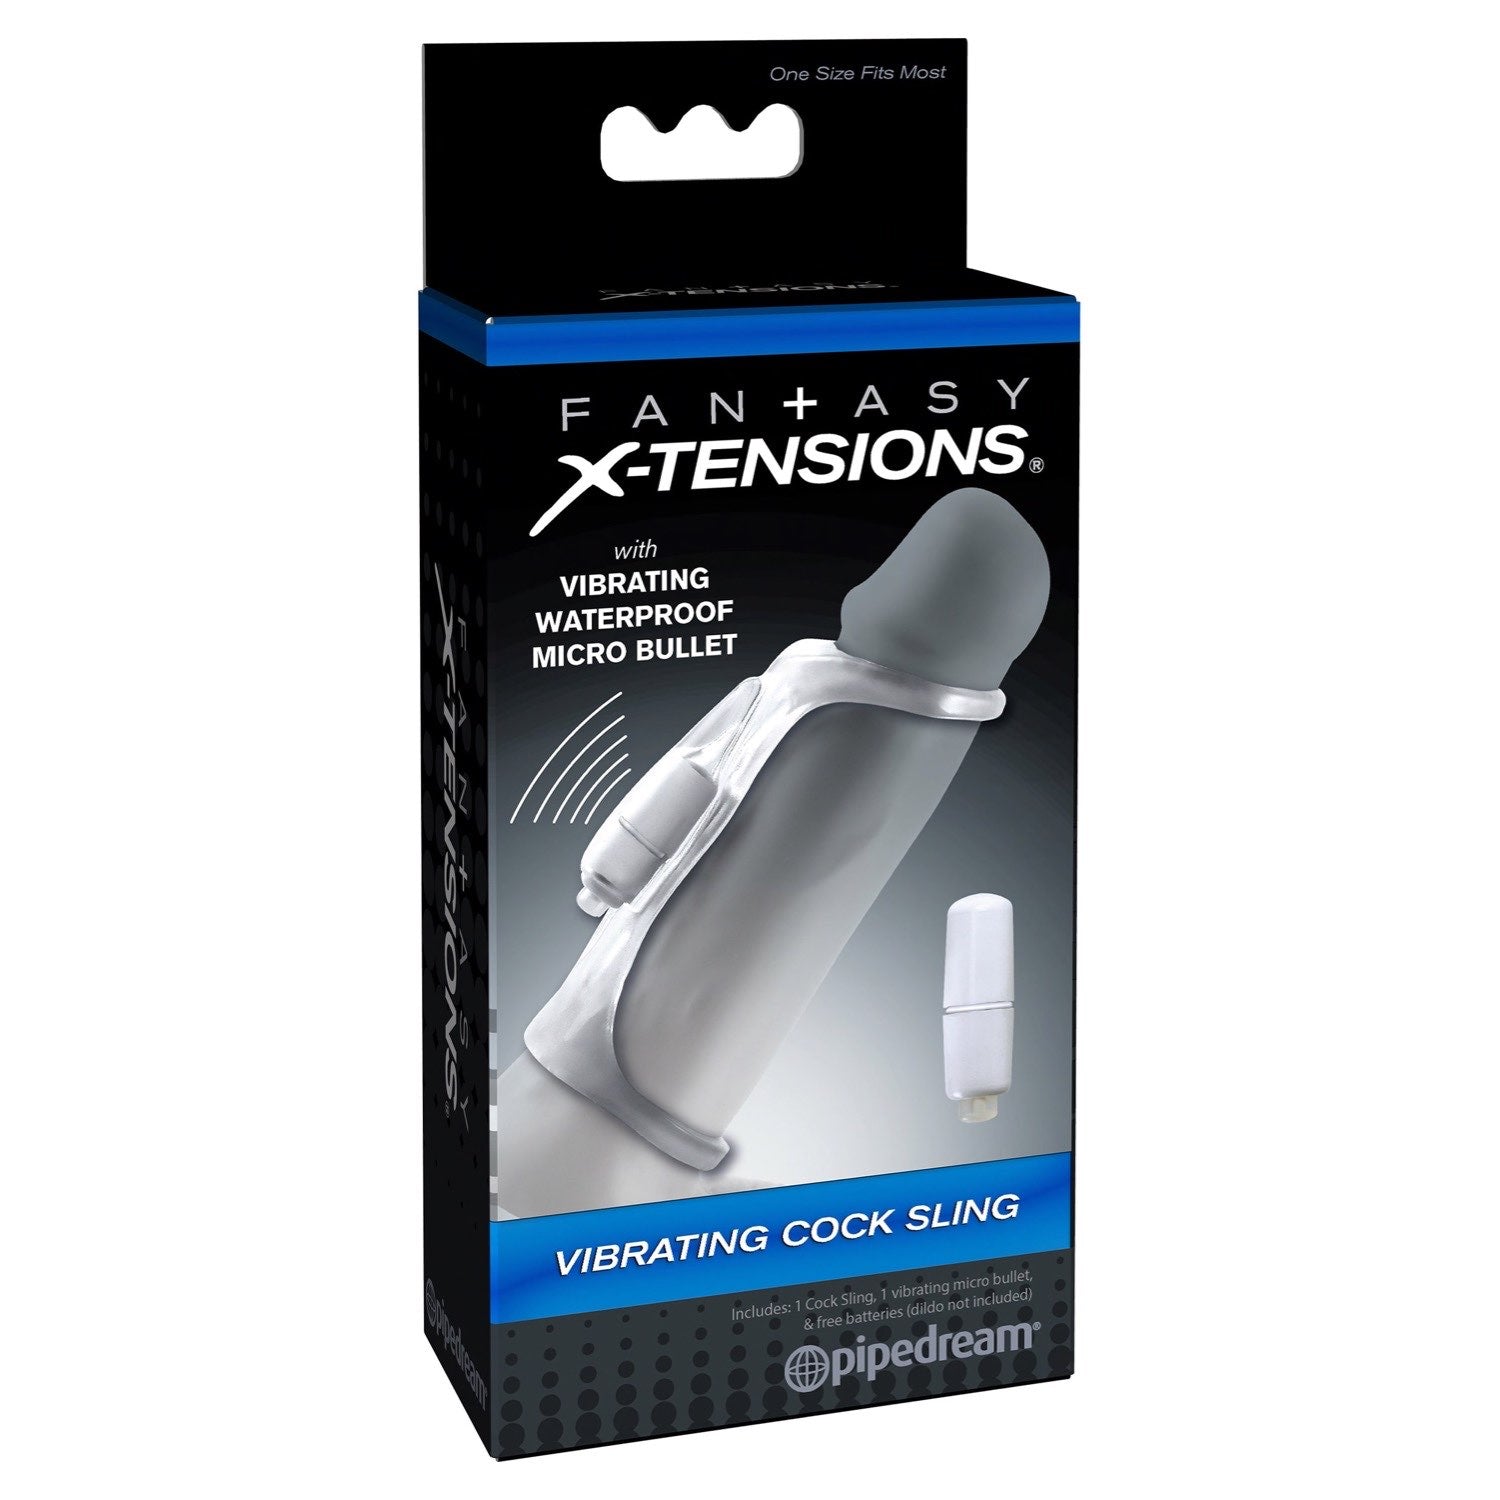 Fantasy X-Tensions Vibrating Cock Sling - Clear Vibrating Penis Sleeve by Pipedream